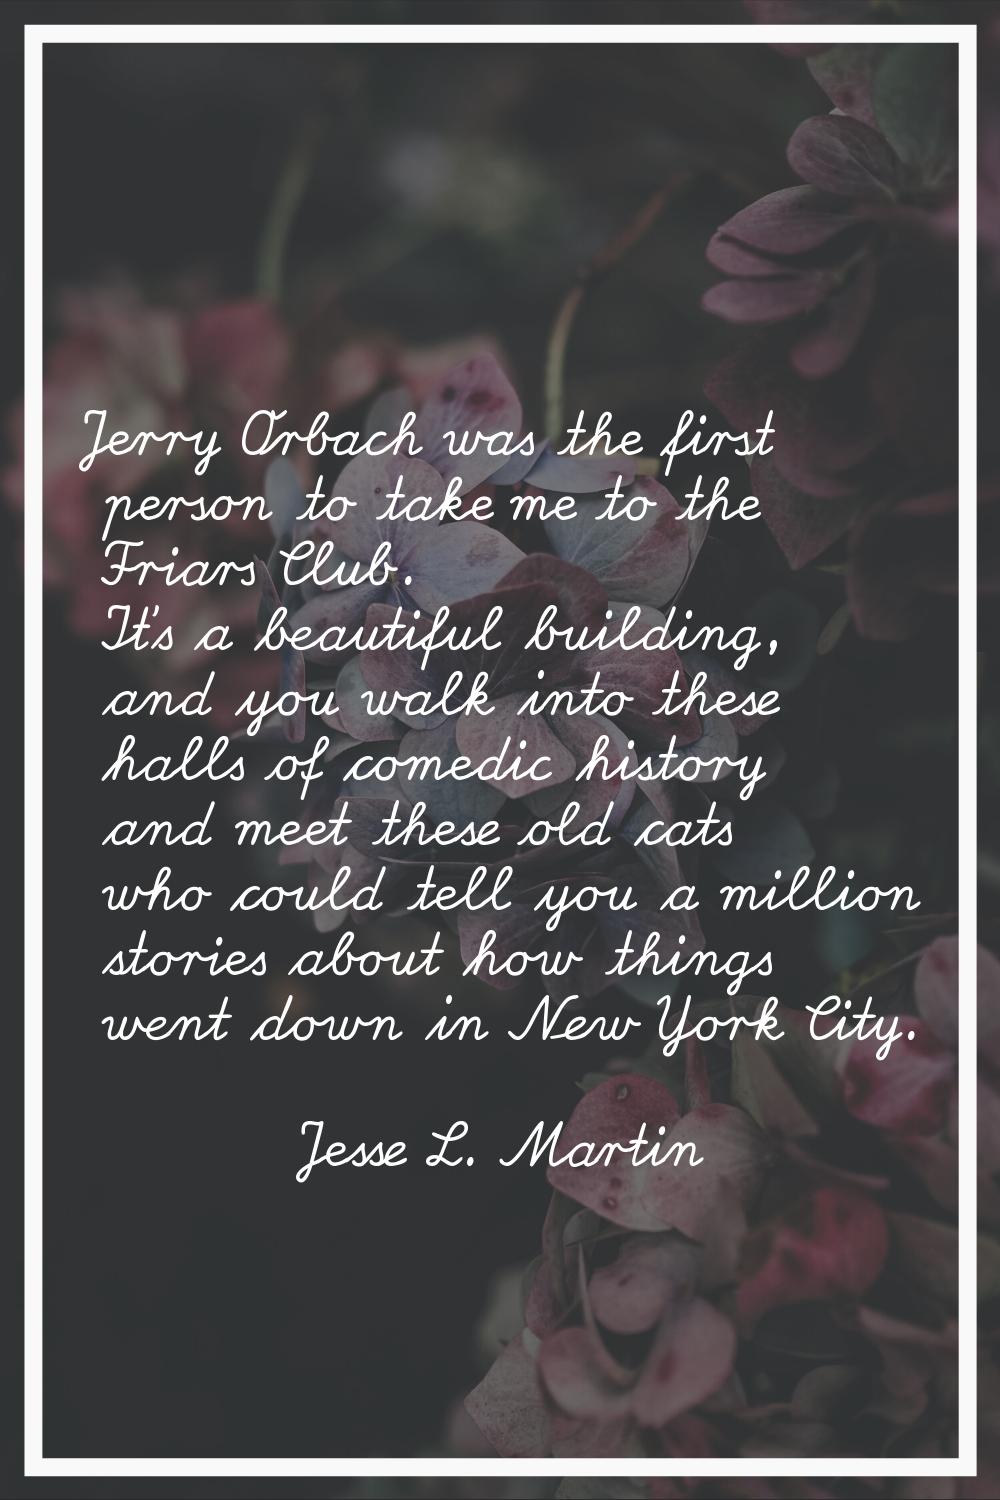 Jerry Orbach was the first person to take me to the Friars Club. It's a beautiful building, and you